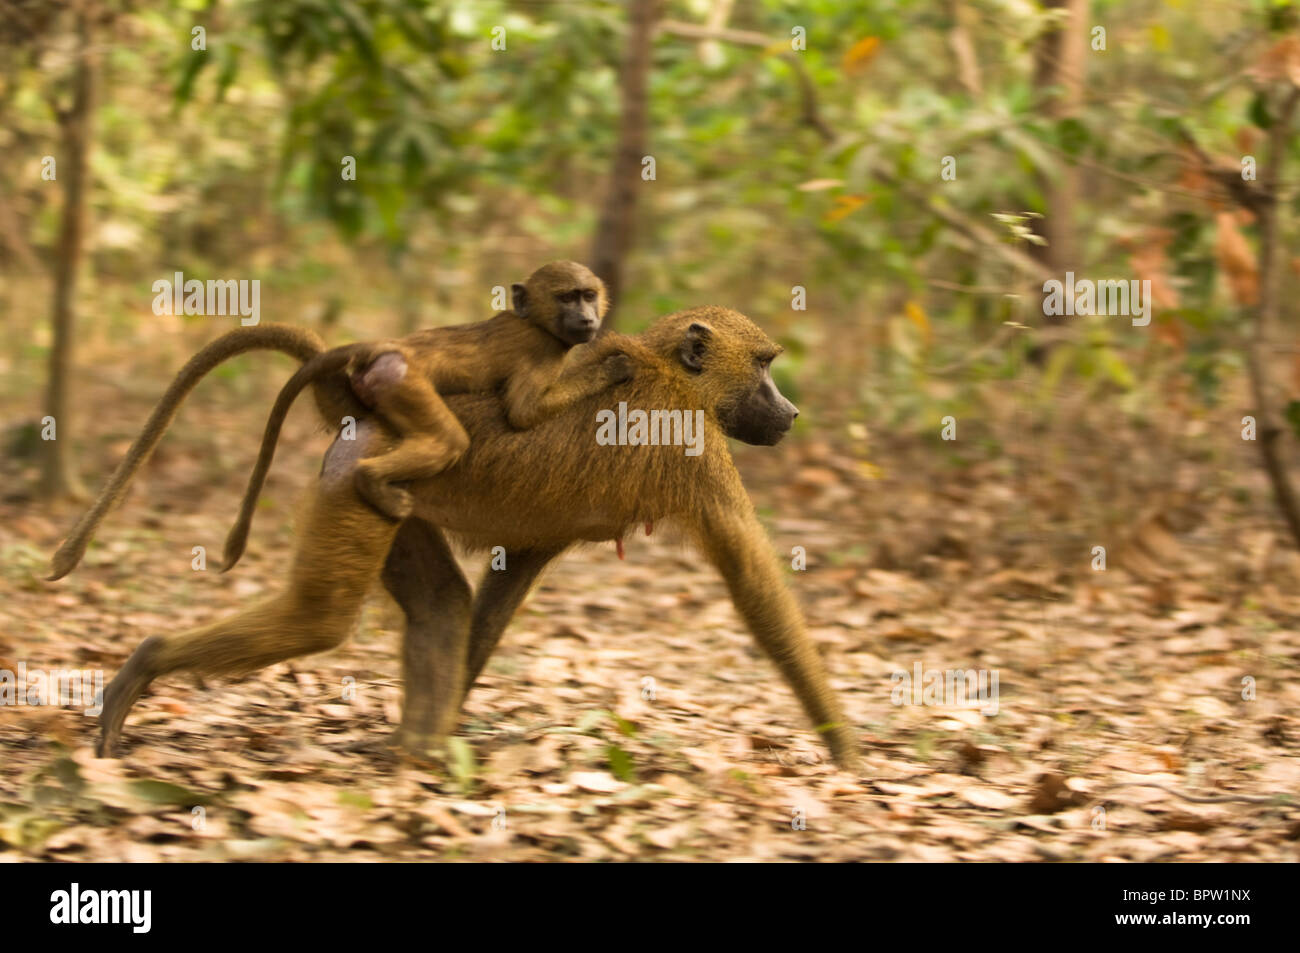 Guinea baboon with baby riding on its back (Papio papio), Makusutu, the Gambia Stock Photo